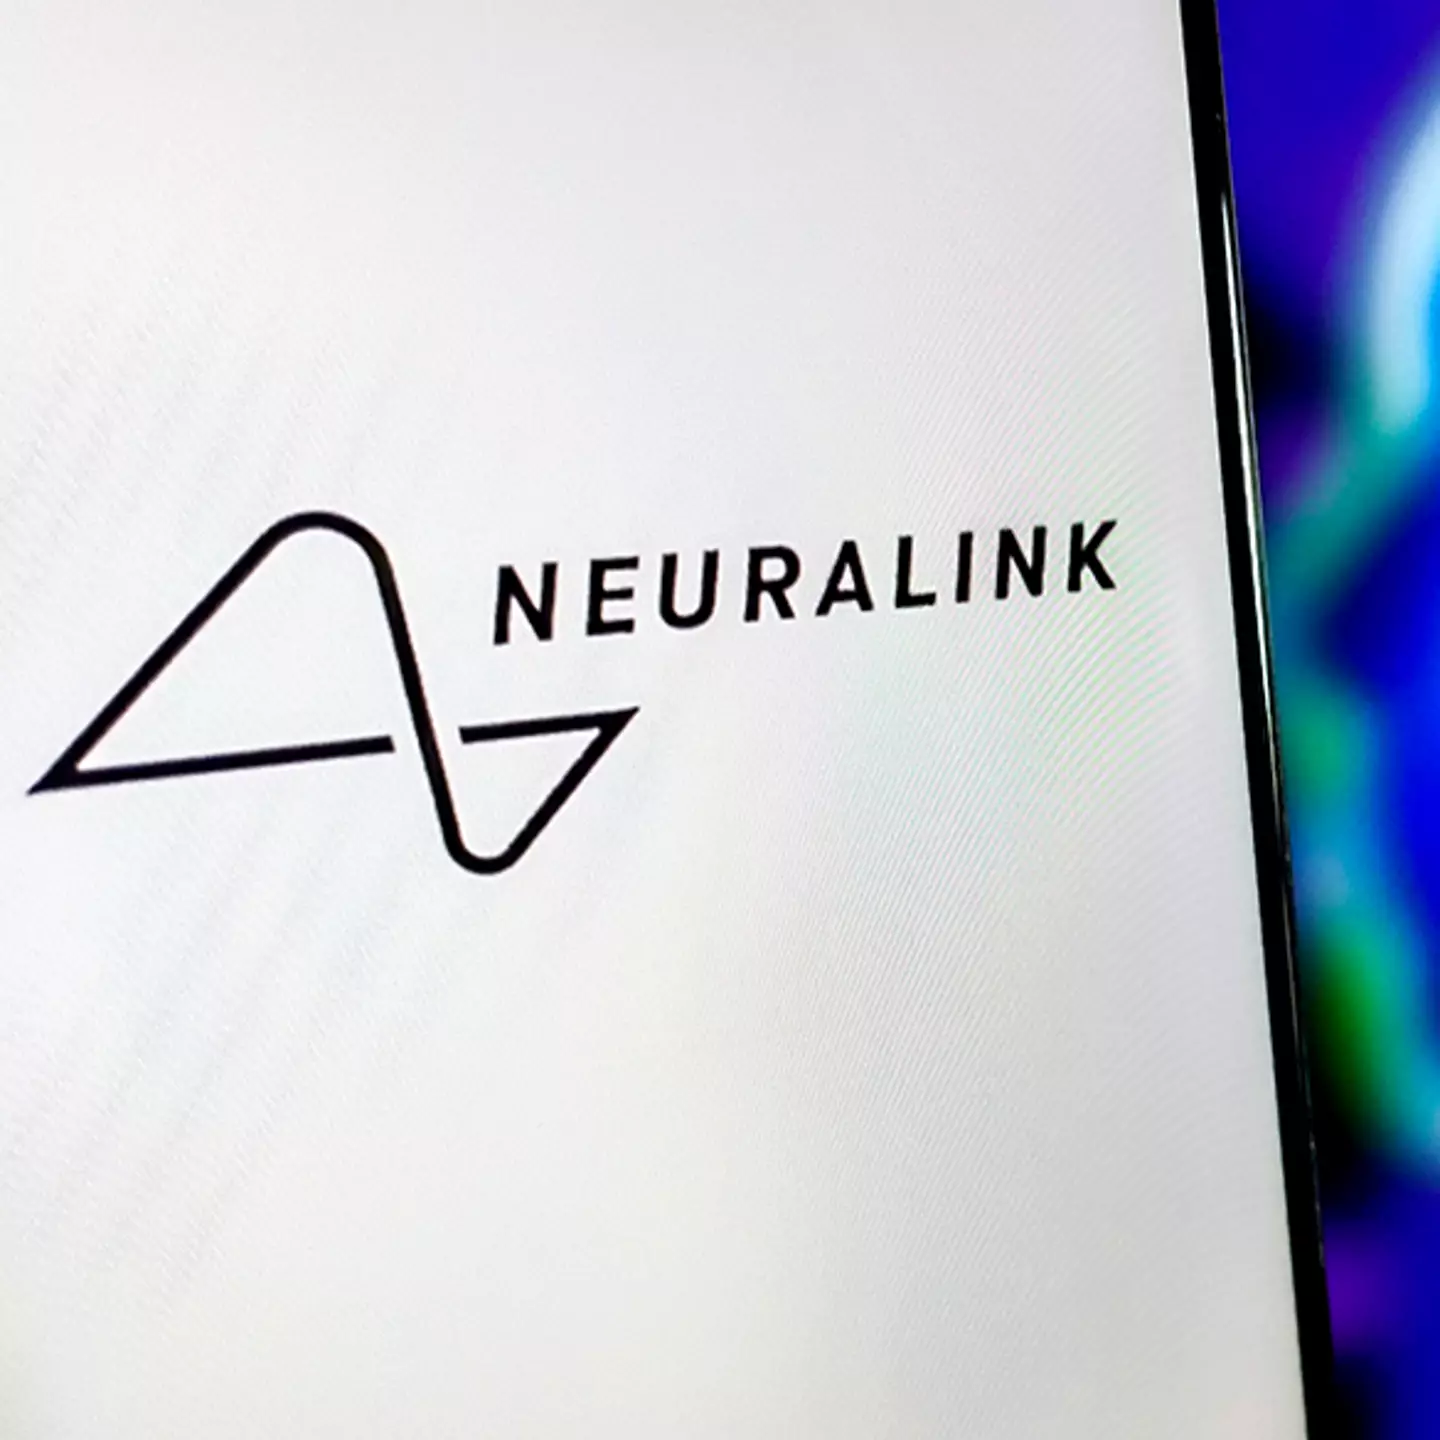 Animation explaining how the Neuralink brain chip works leaves everybody with the same worrying concern